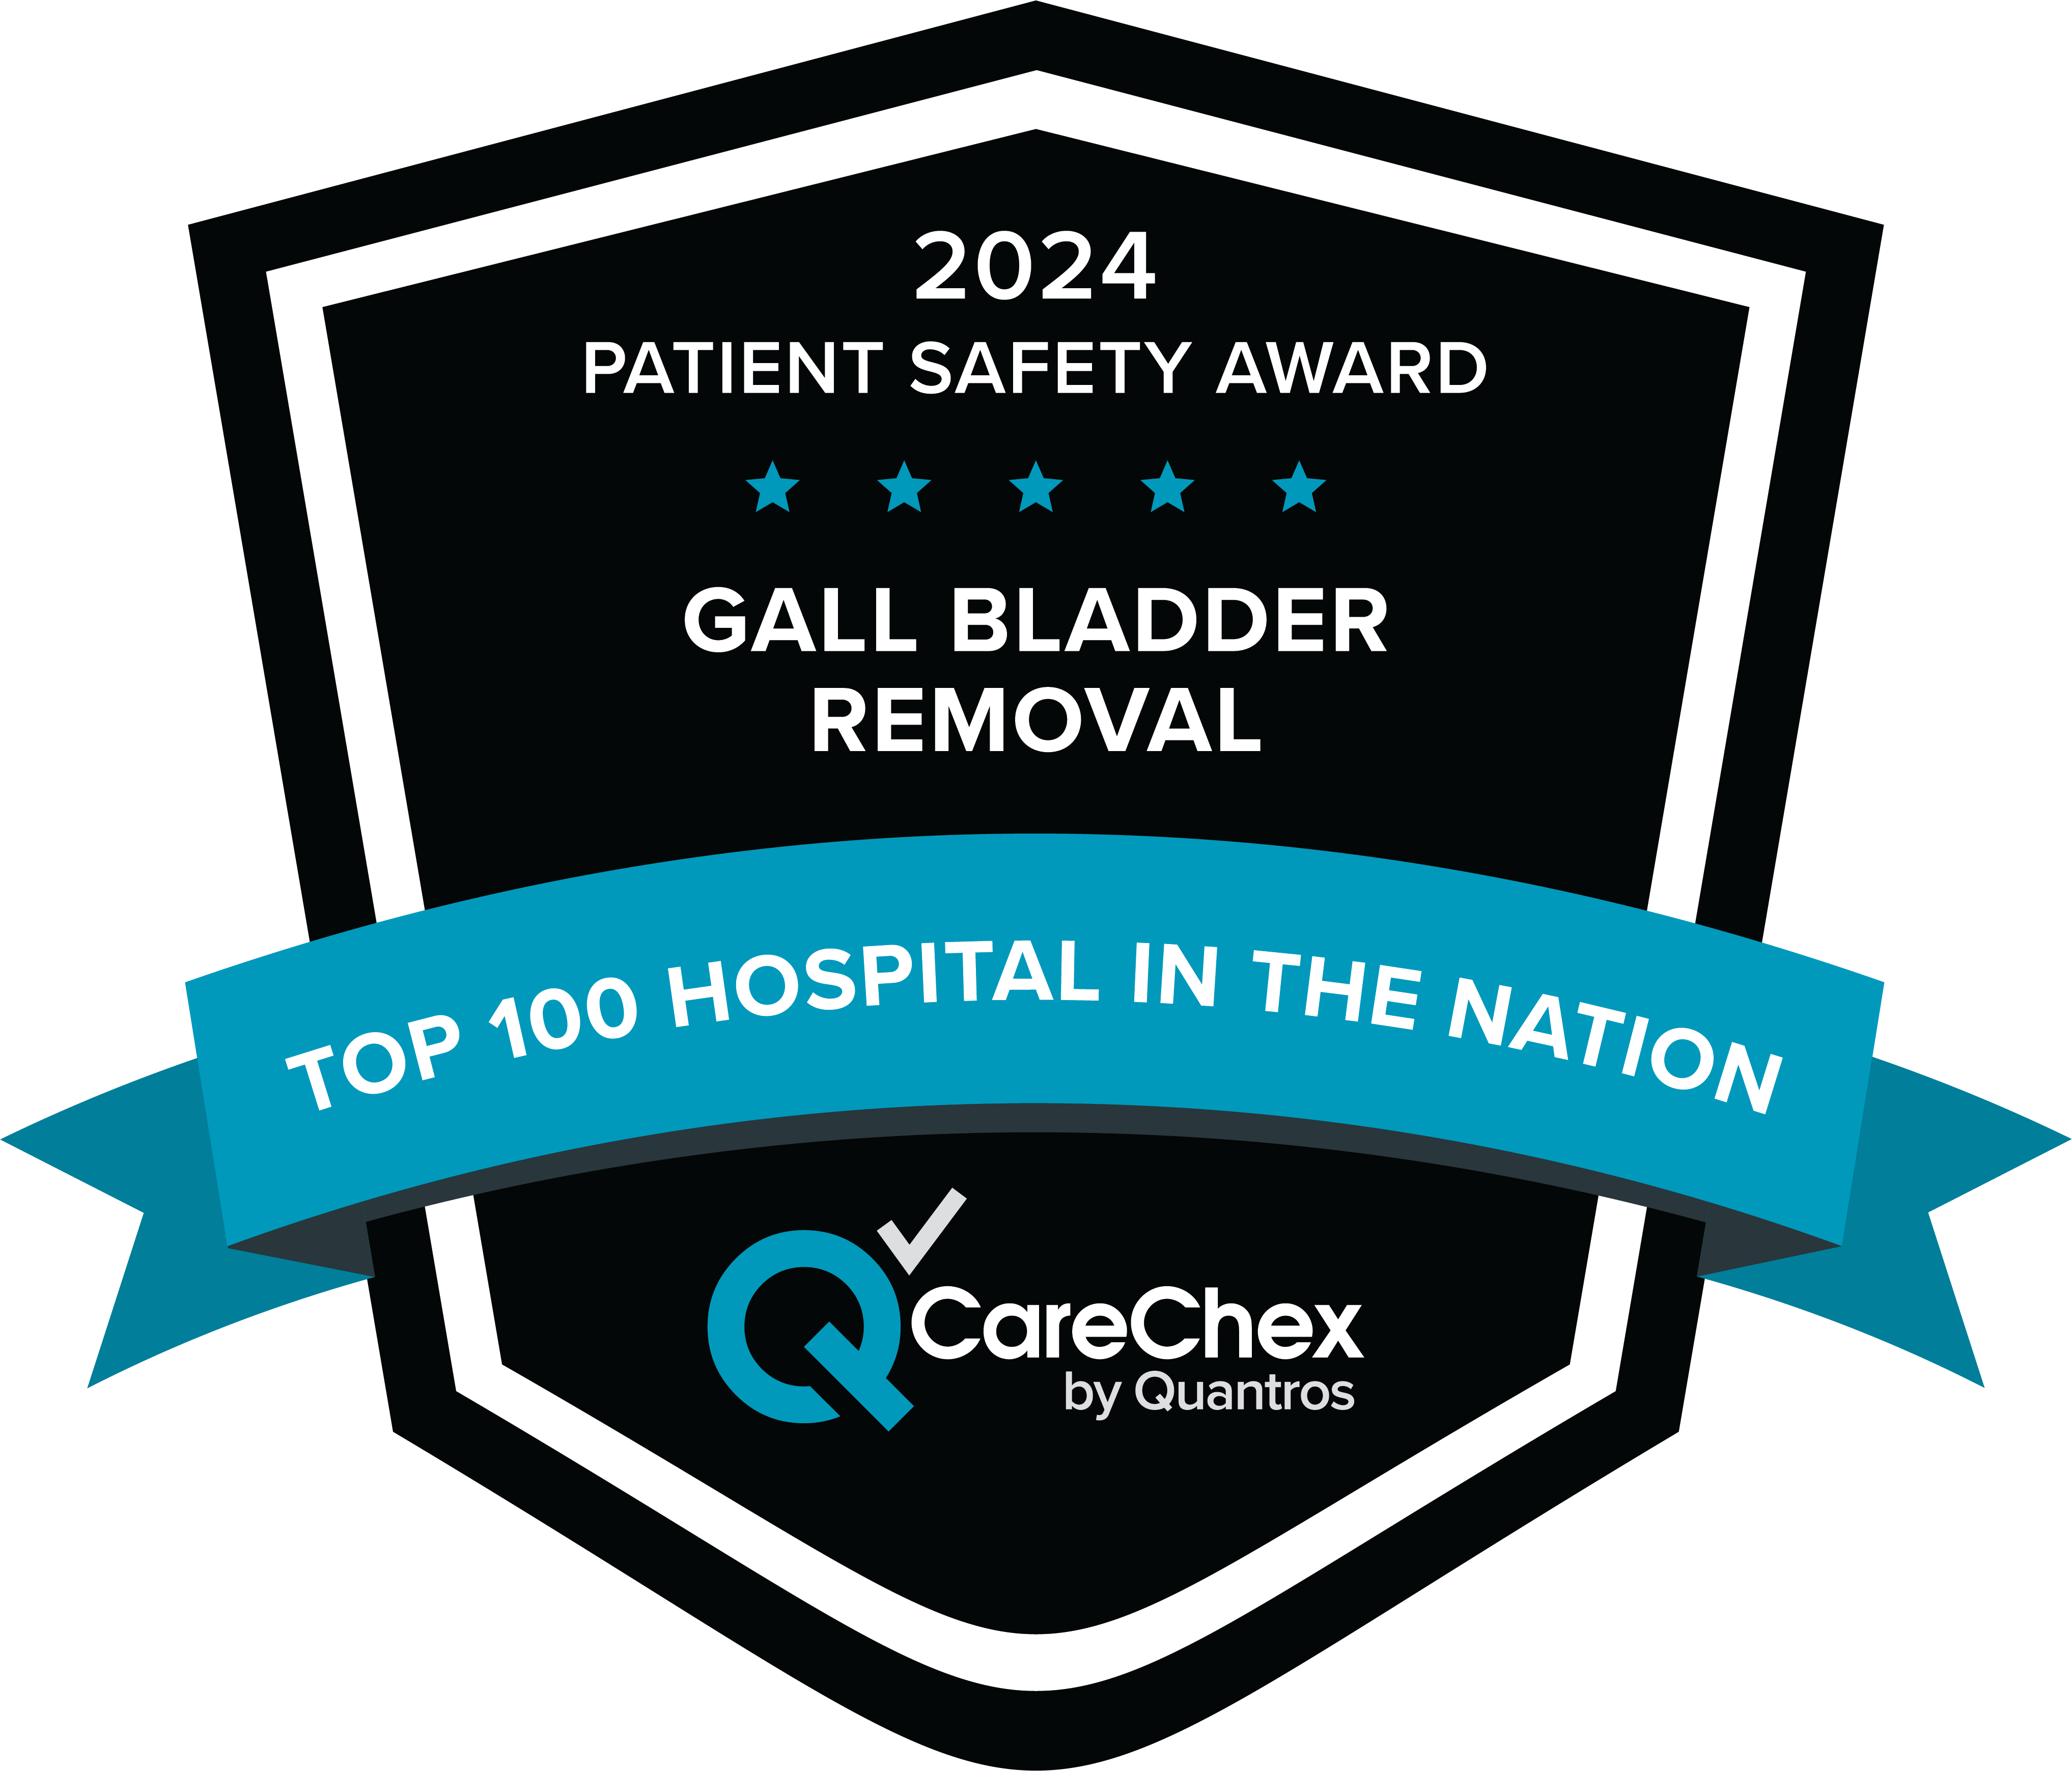 Awards badge for Top 100 Hospital in the Nation for Patient Safety in Gall Bladder Removal – 2024 CareChex by Quantros